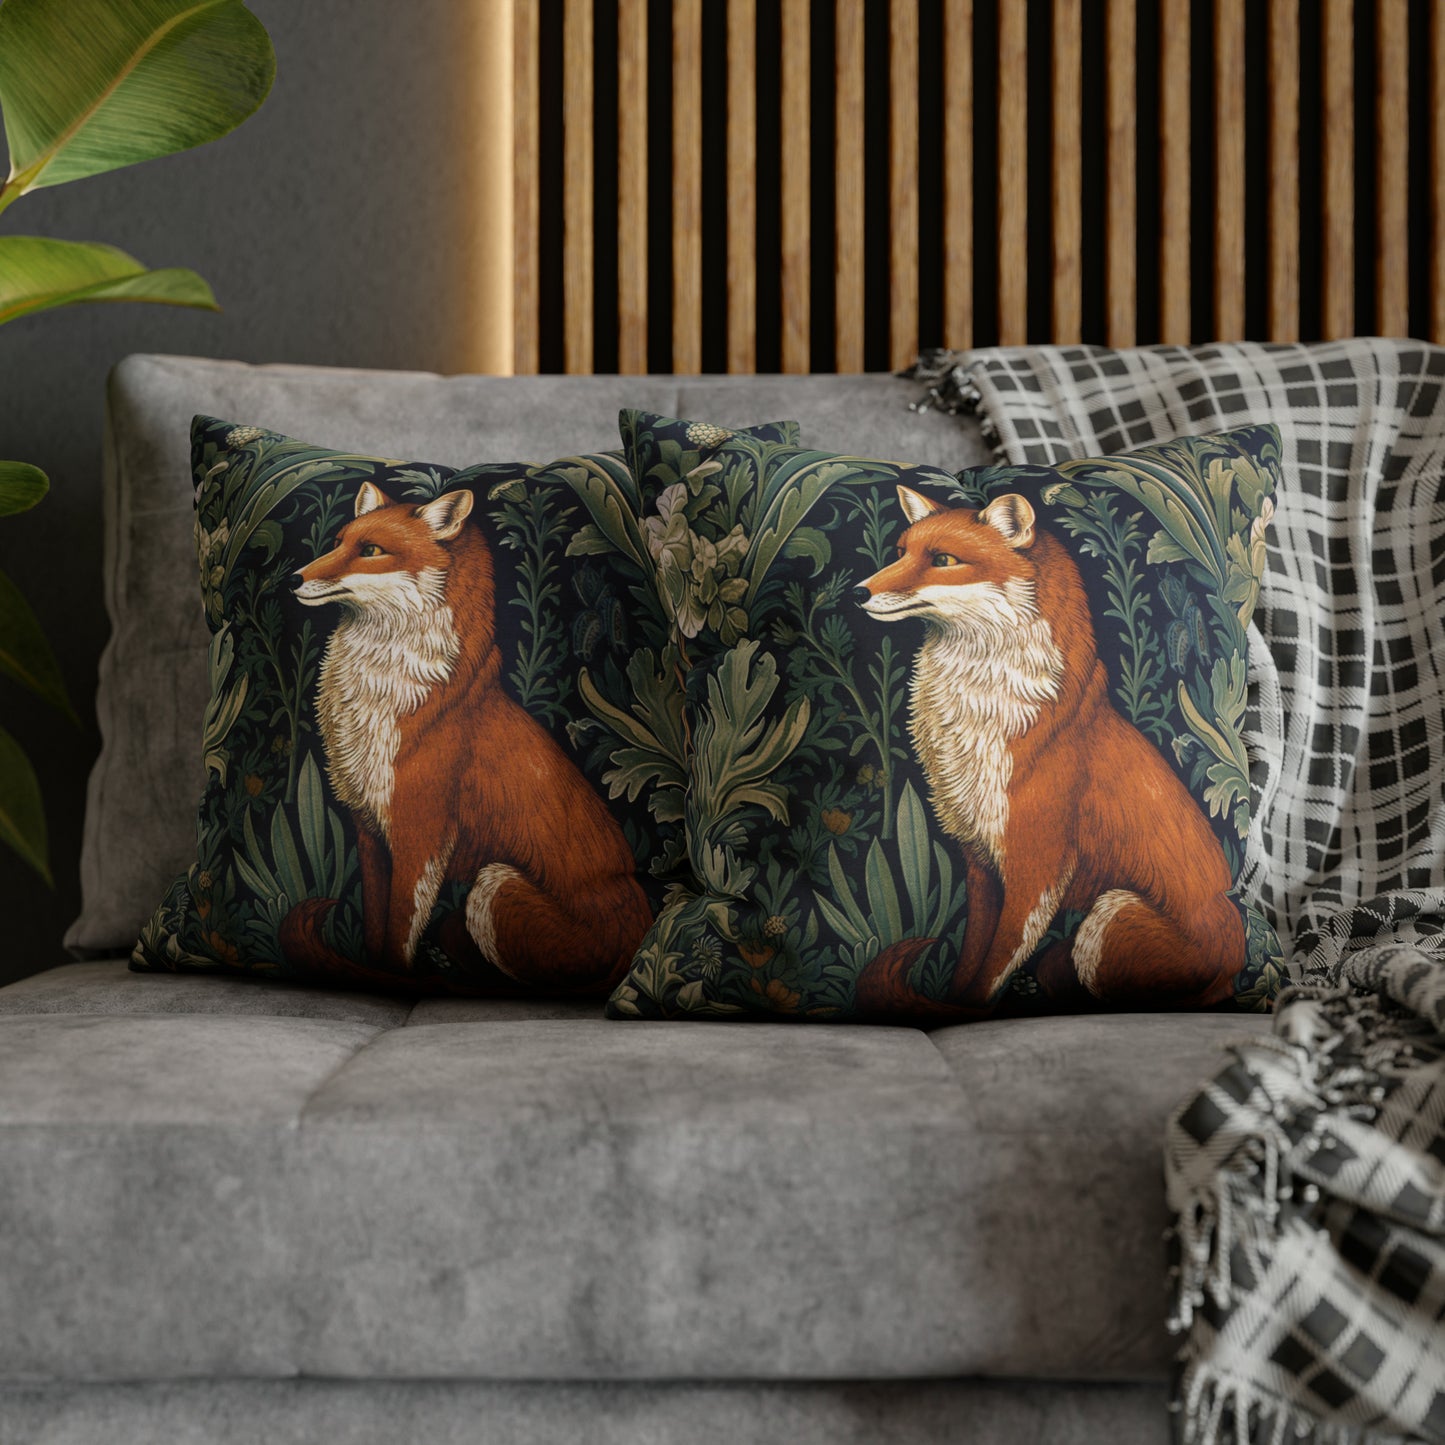 Enchanted Fox Pillow William Morris Inspired Pillow and Case